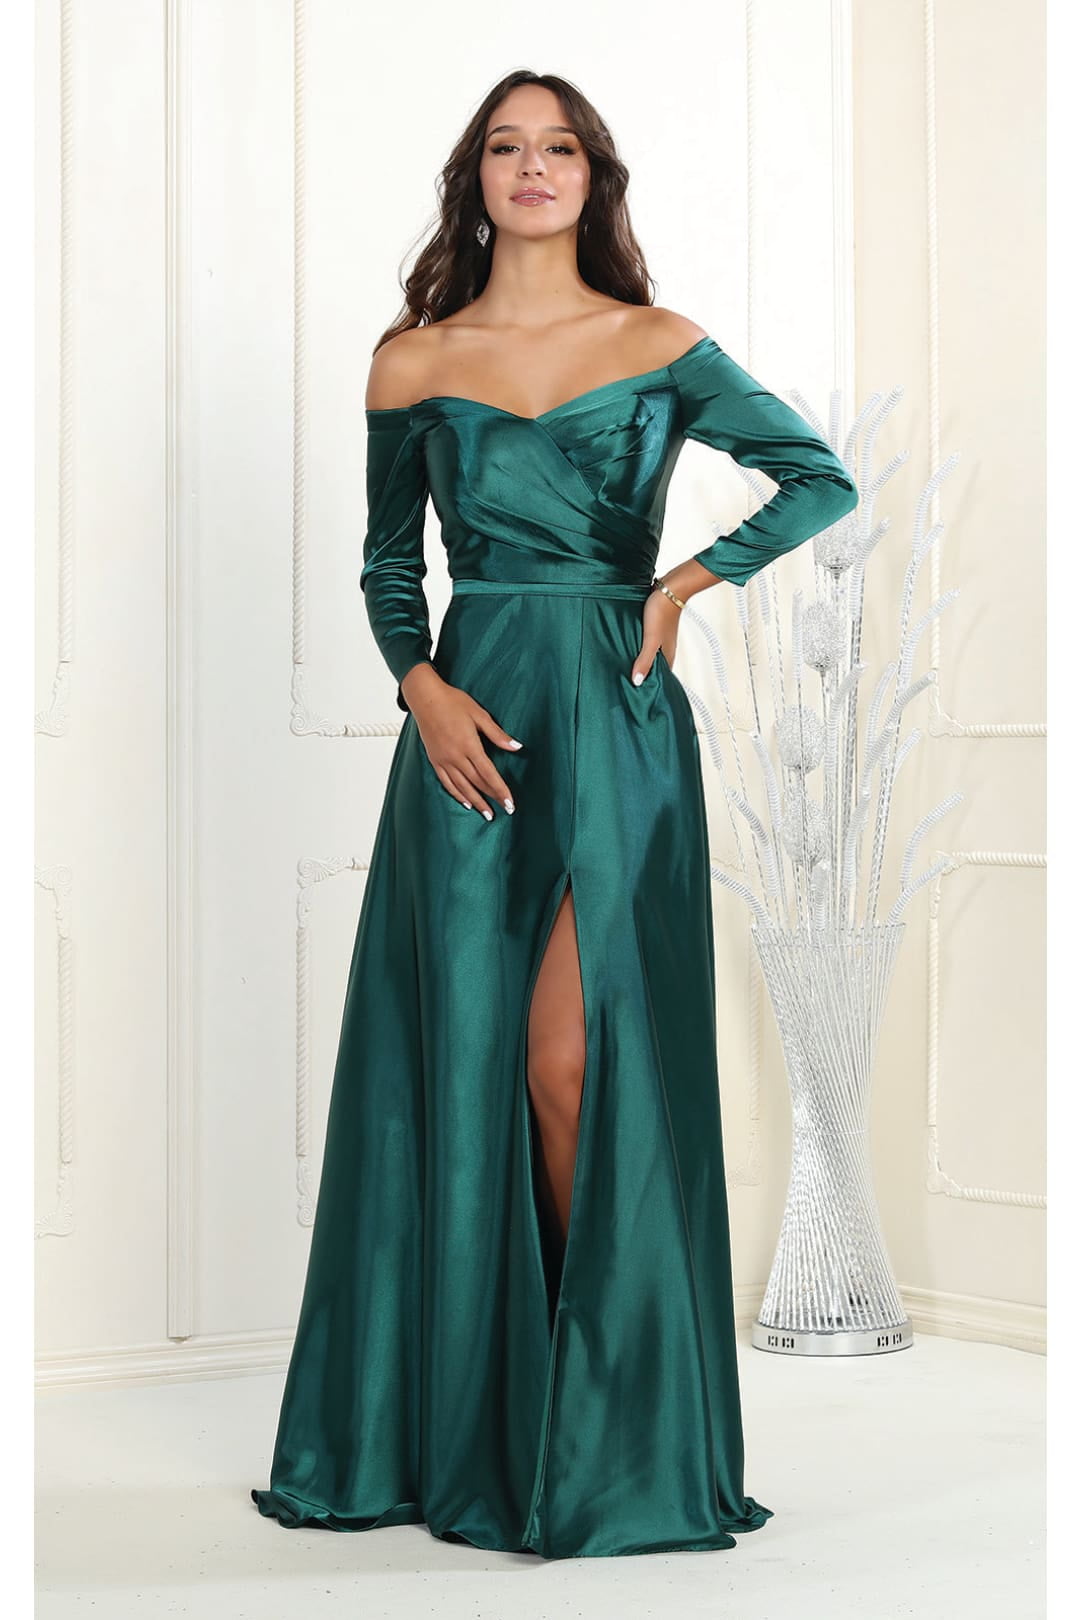 Hunter Green Crepe Back Satin Bridal Fabric Draper-prom-wedding-nightgown  Soft 5860 Inches Sold by the Yard. -  Canada